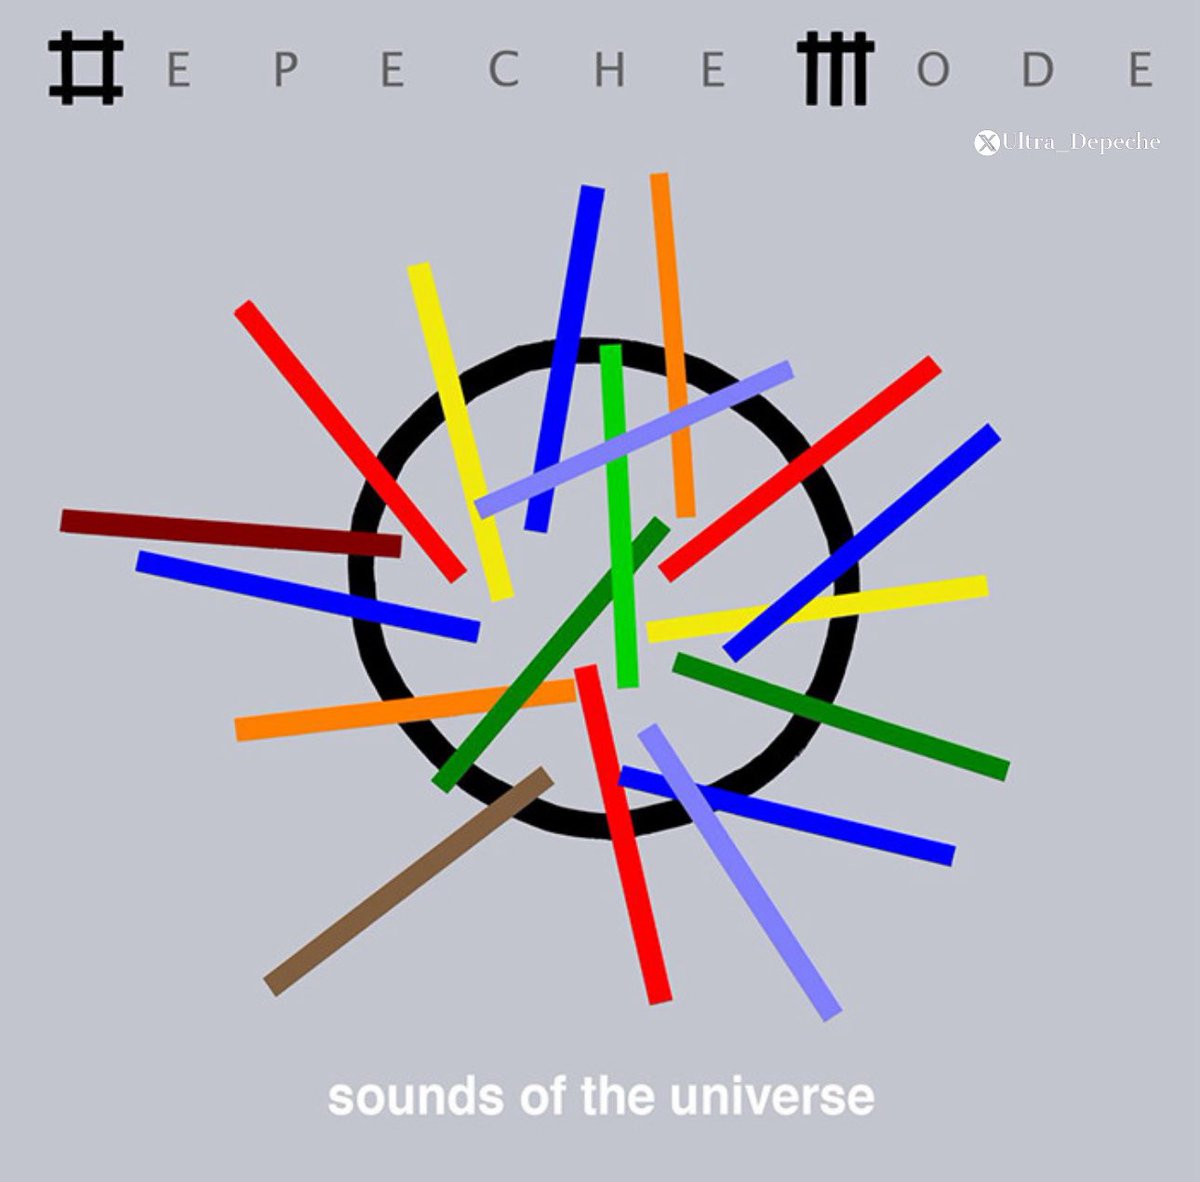 15 years ago today, Depeche Mode released 'Sounds Of The Universe' (UK 2009) #DepecheMode